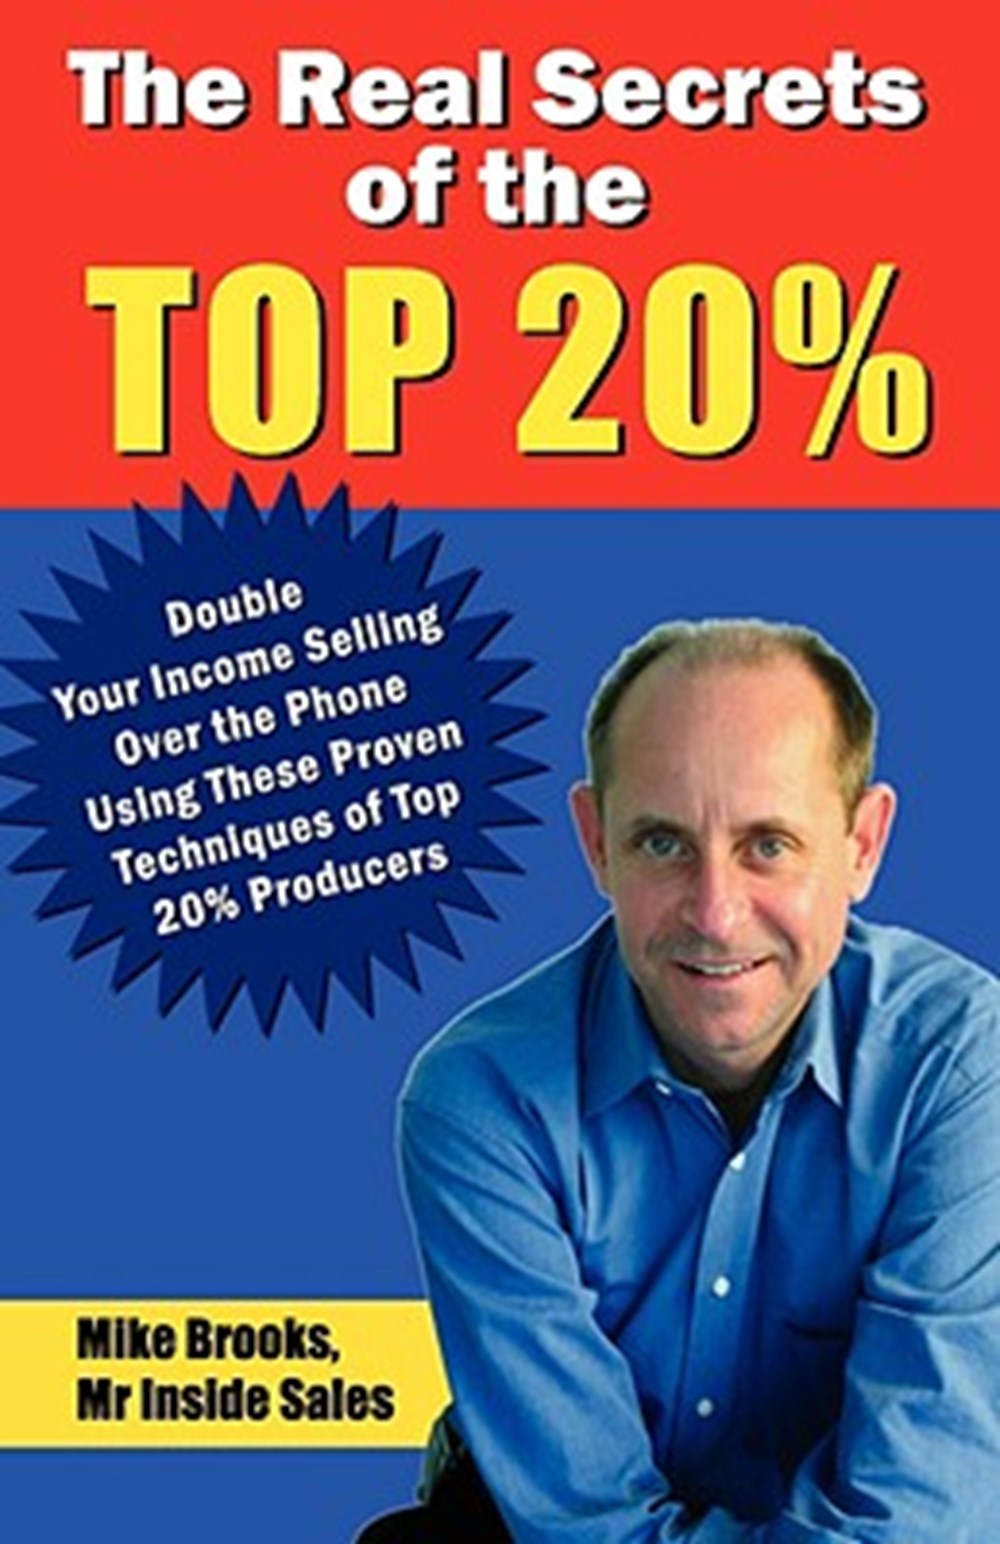 Real Secrets of the Top 20% How to Double Your Income Selling Over the Phone